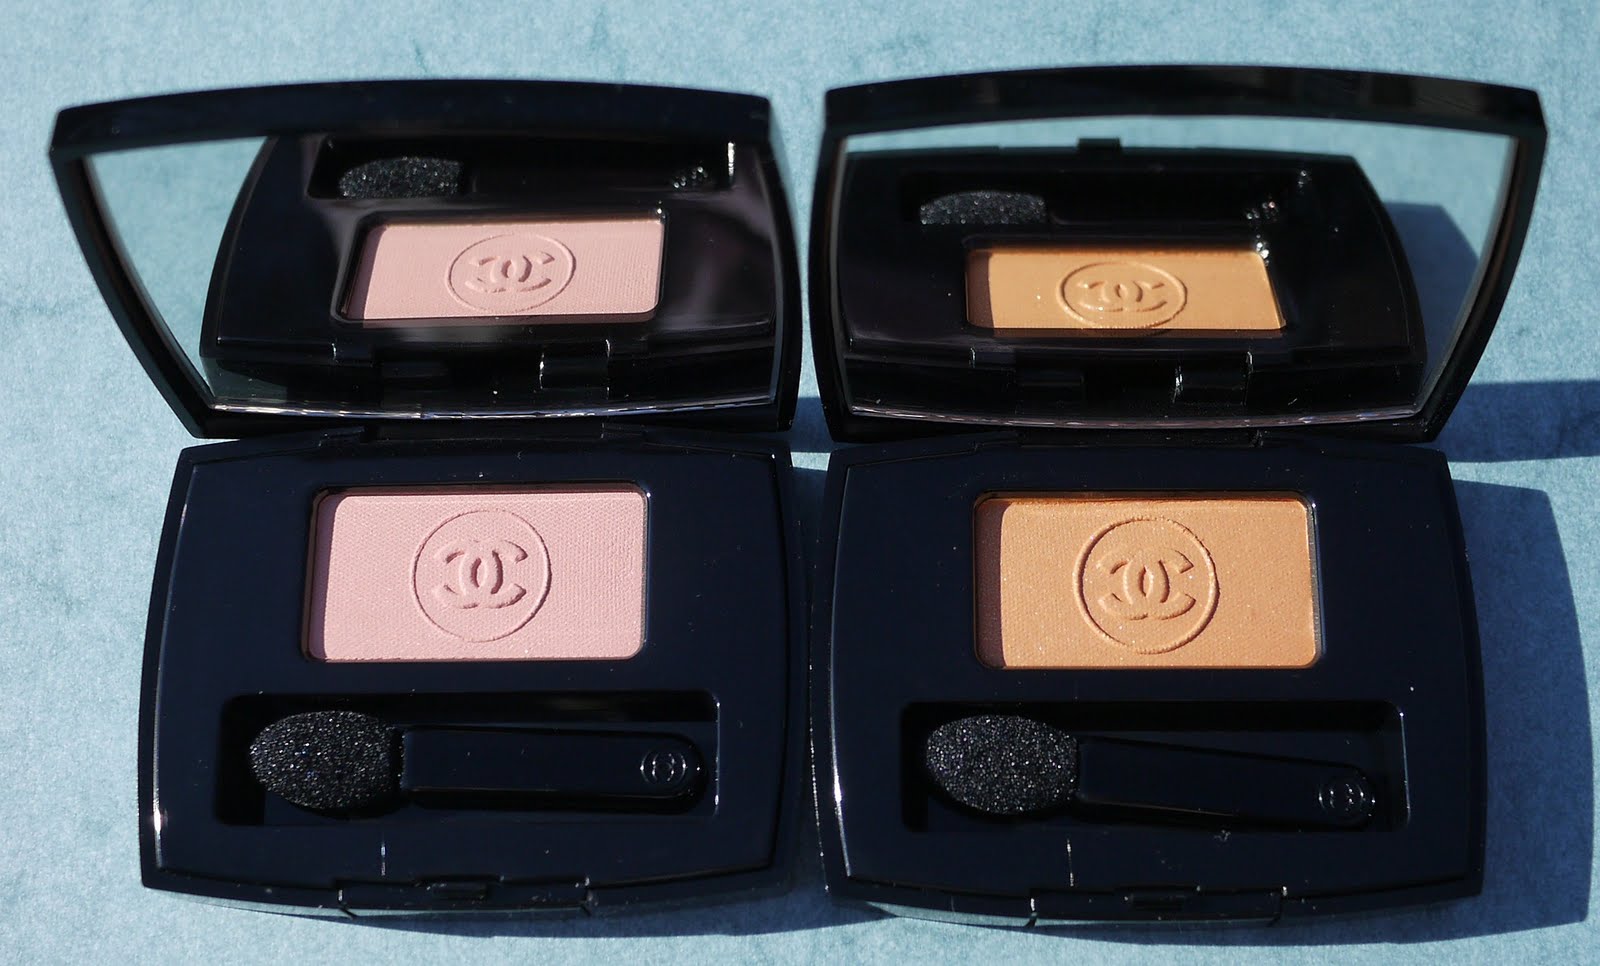 session ur give Best Things in Beauty: Chanel Ombre Essentielle Soft Touch Eyeshadow -  Harmonie de Printemps Collection for Spring 2012